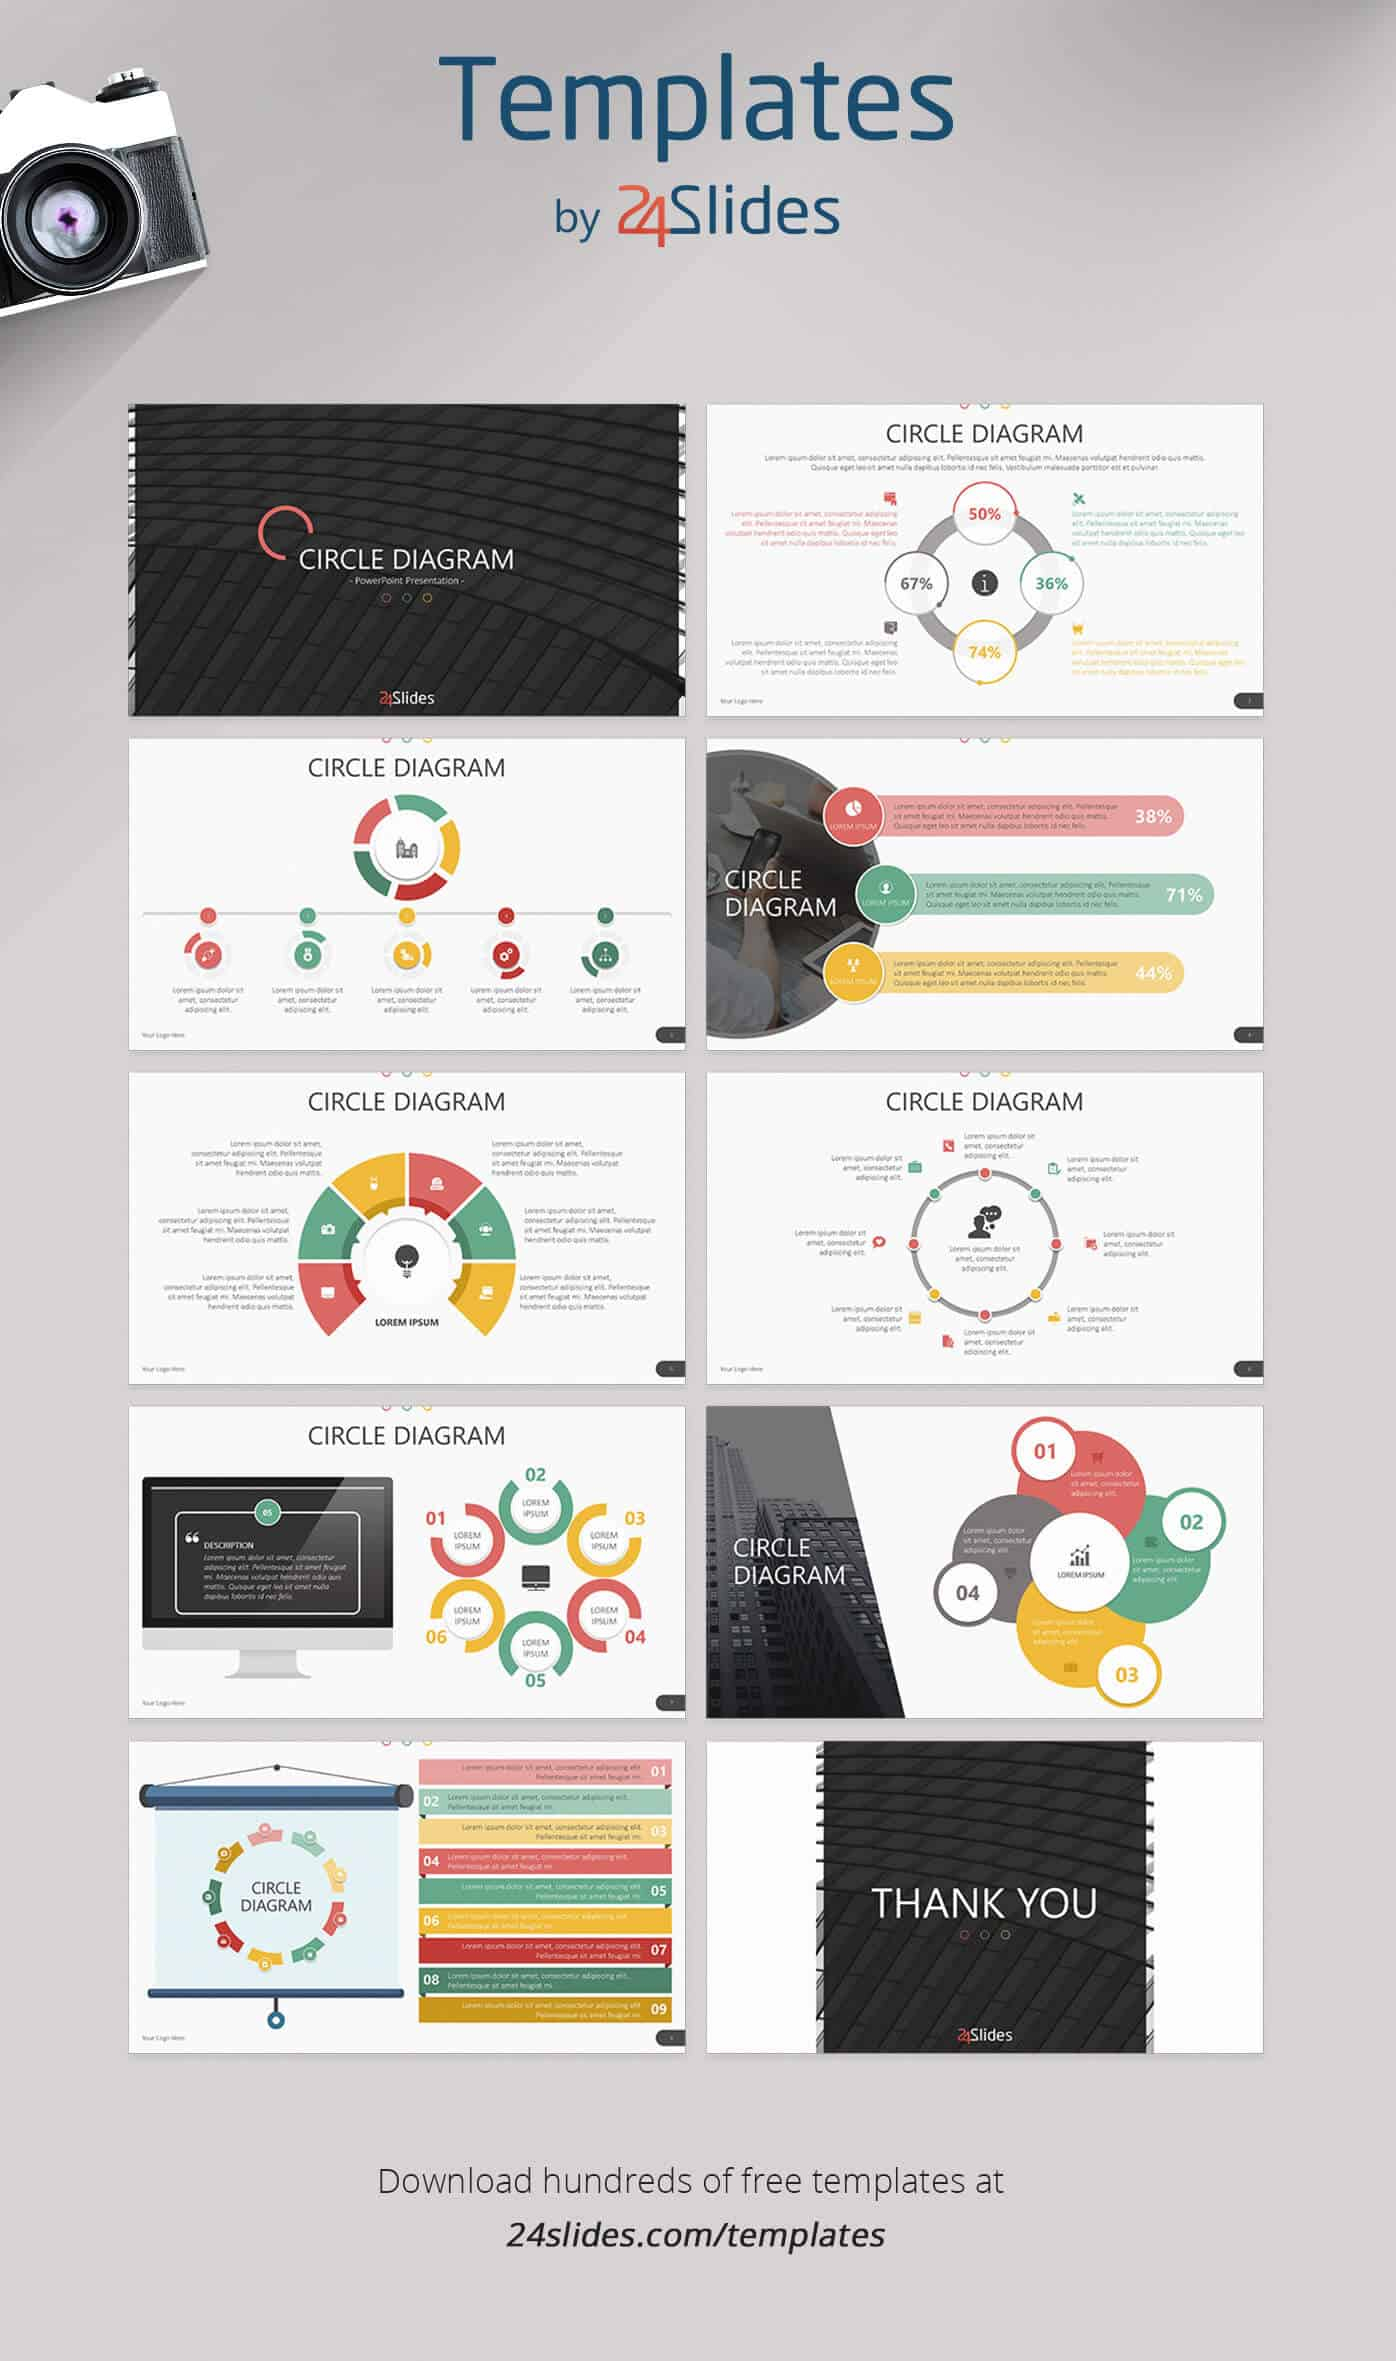 15 Fun And Colorful Free Powerpoint Templates | Present Better For Raf Powerpoint Template